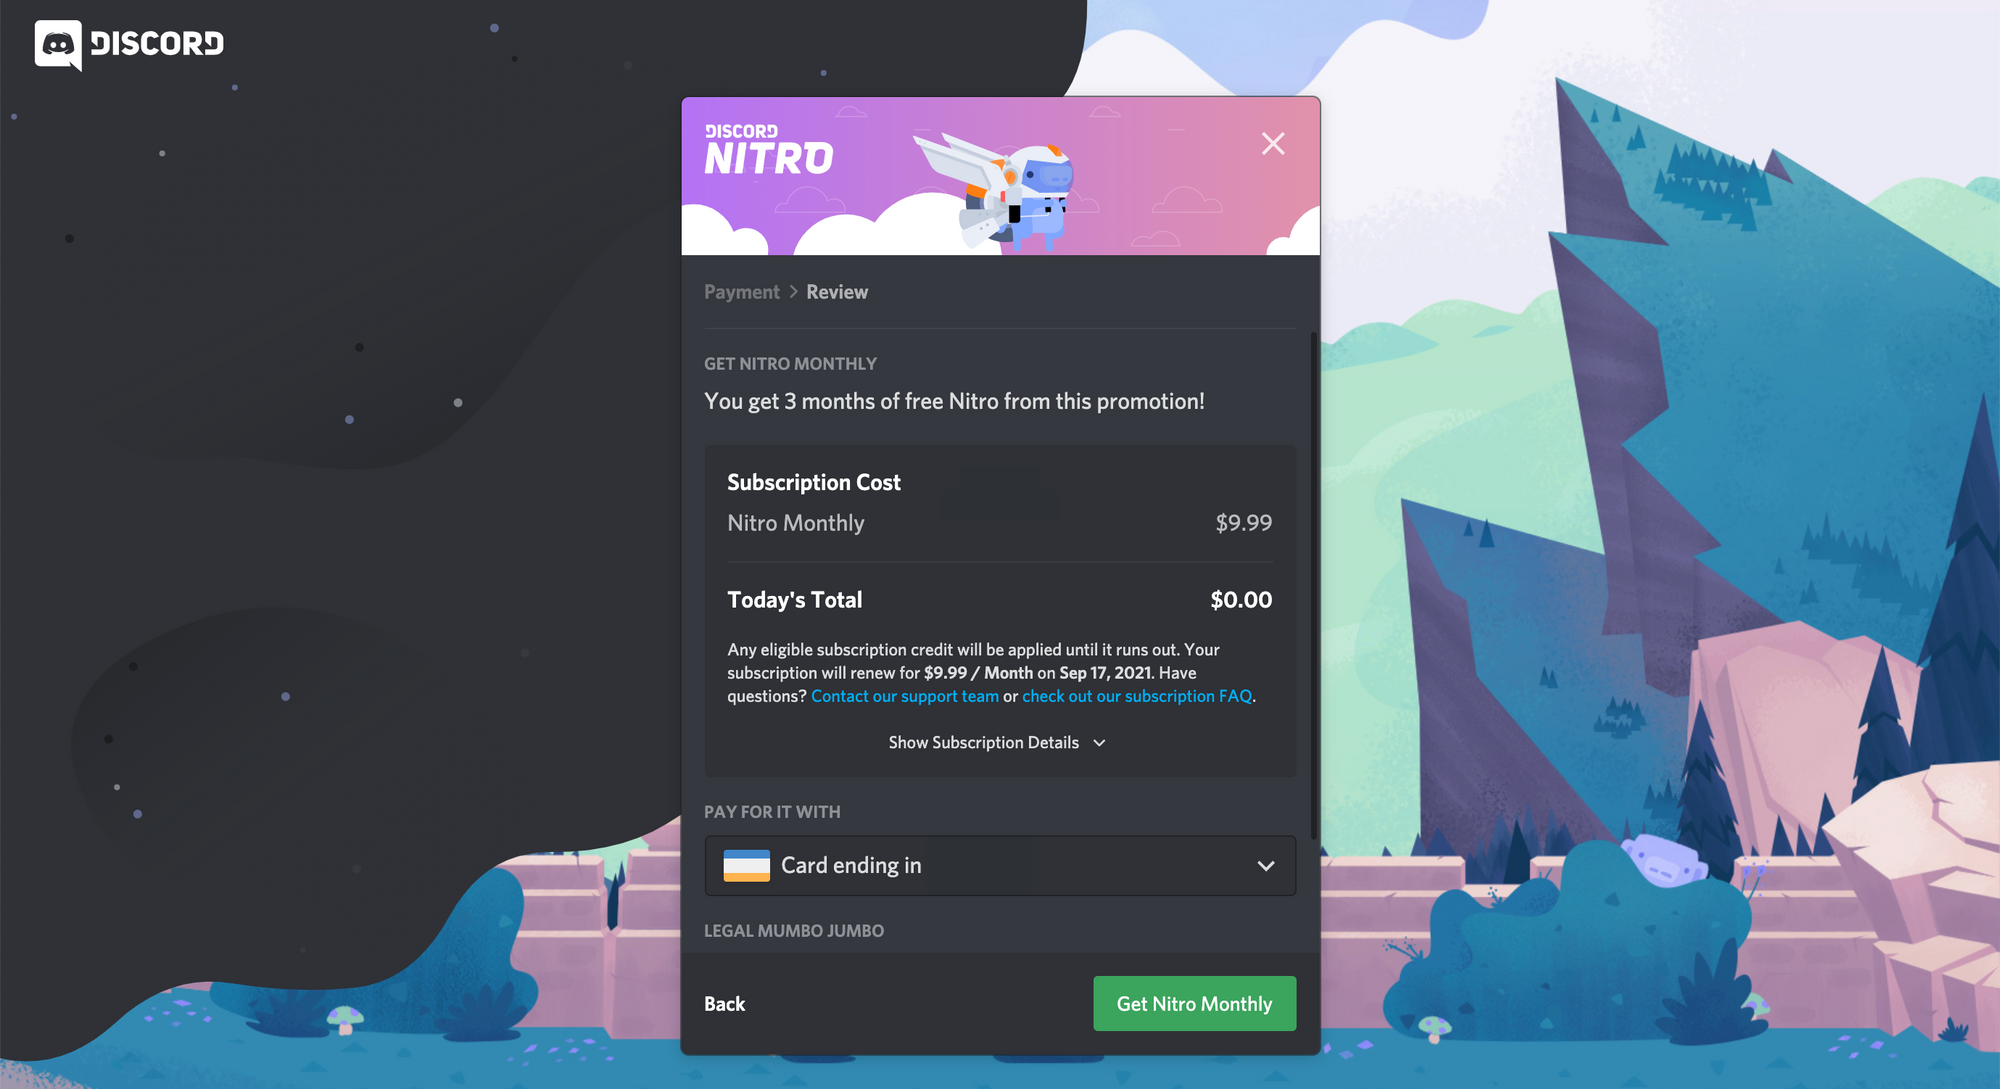 how to get free discord nitro and spotify premium with xbox game pass ultimate!